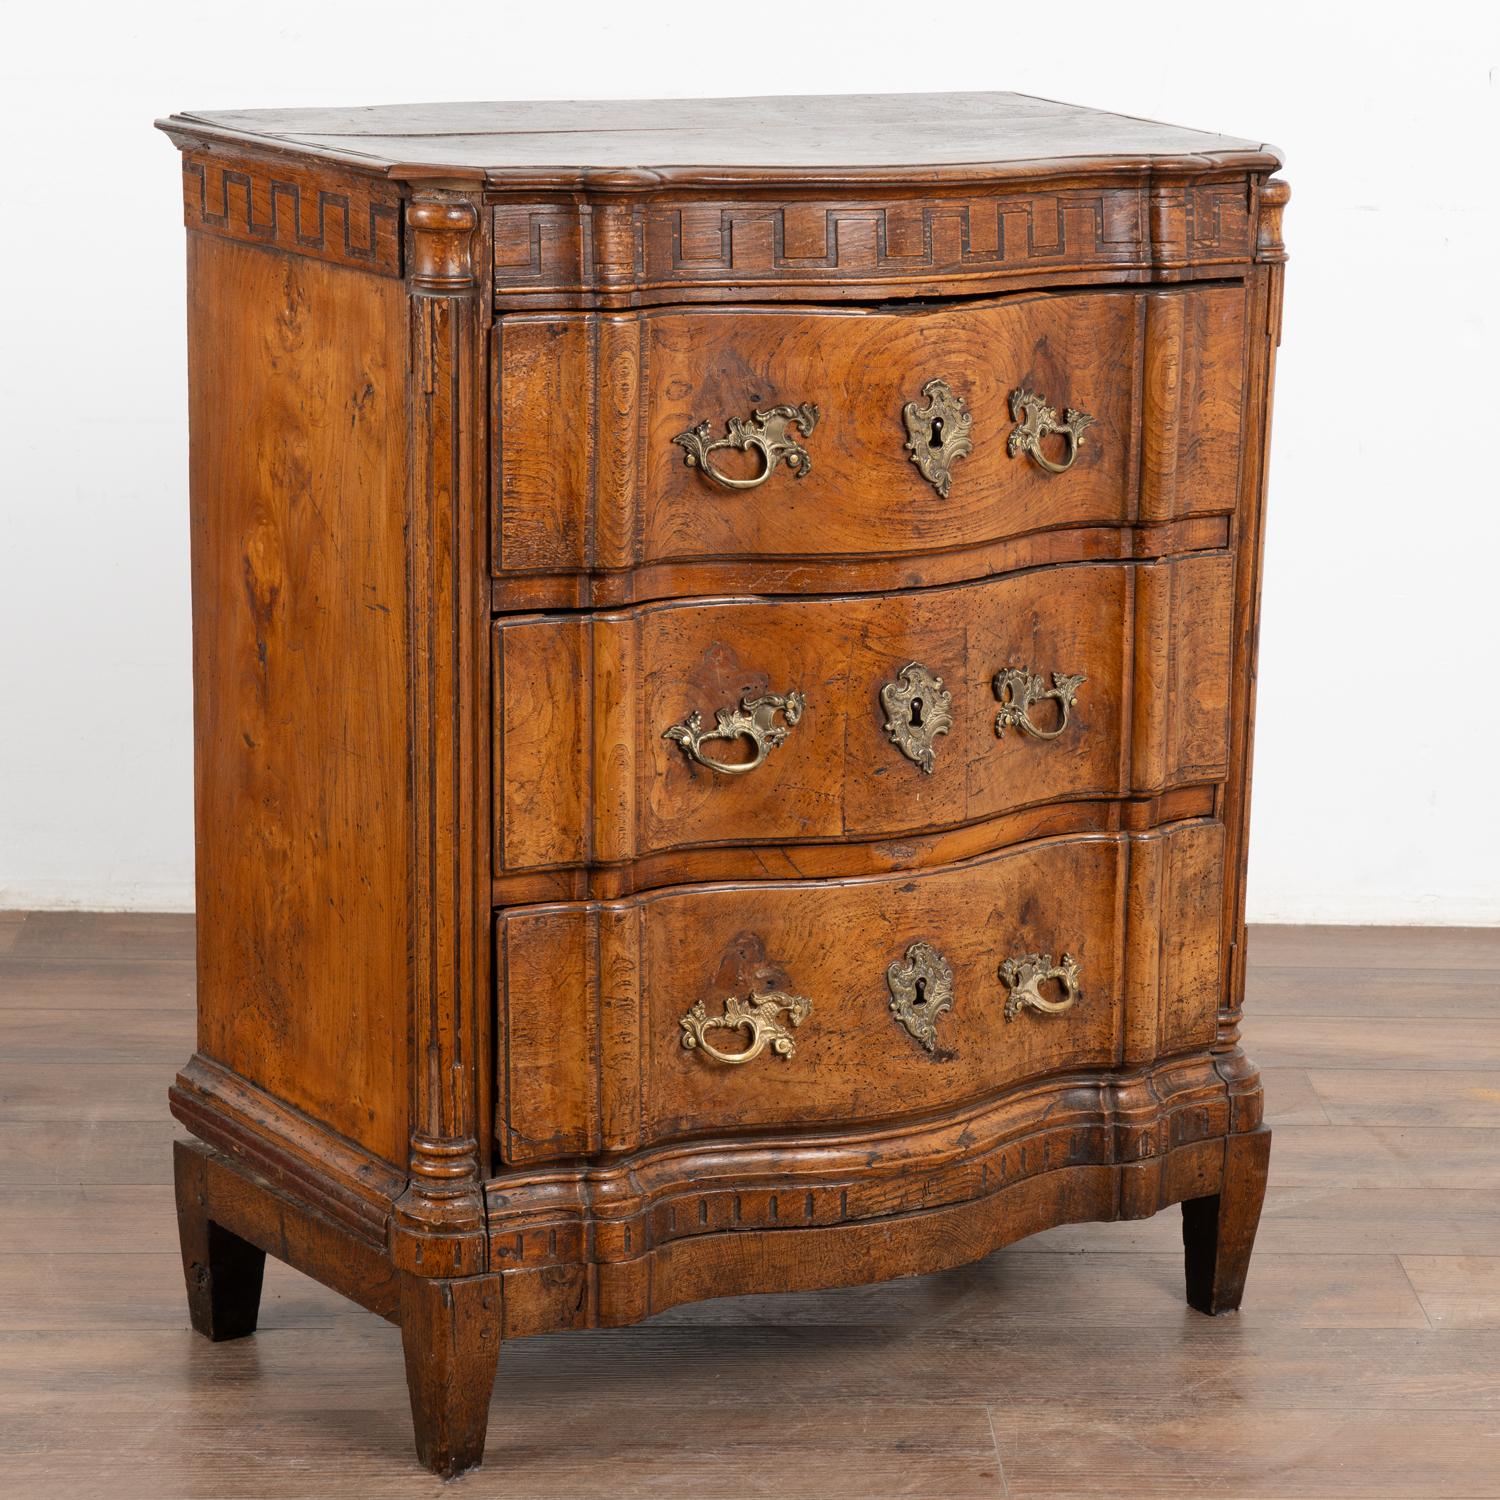 A Danish late 18th century Louis XVI chest of three drawers. Serpentine front topped with carved Greek key motif.
The dark, rich patina of the elm wood reflects generations of use. Note cracks/separation of wood in particularly the top and